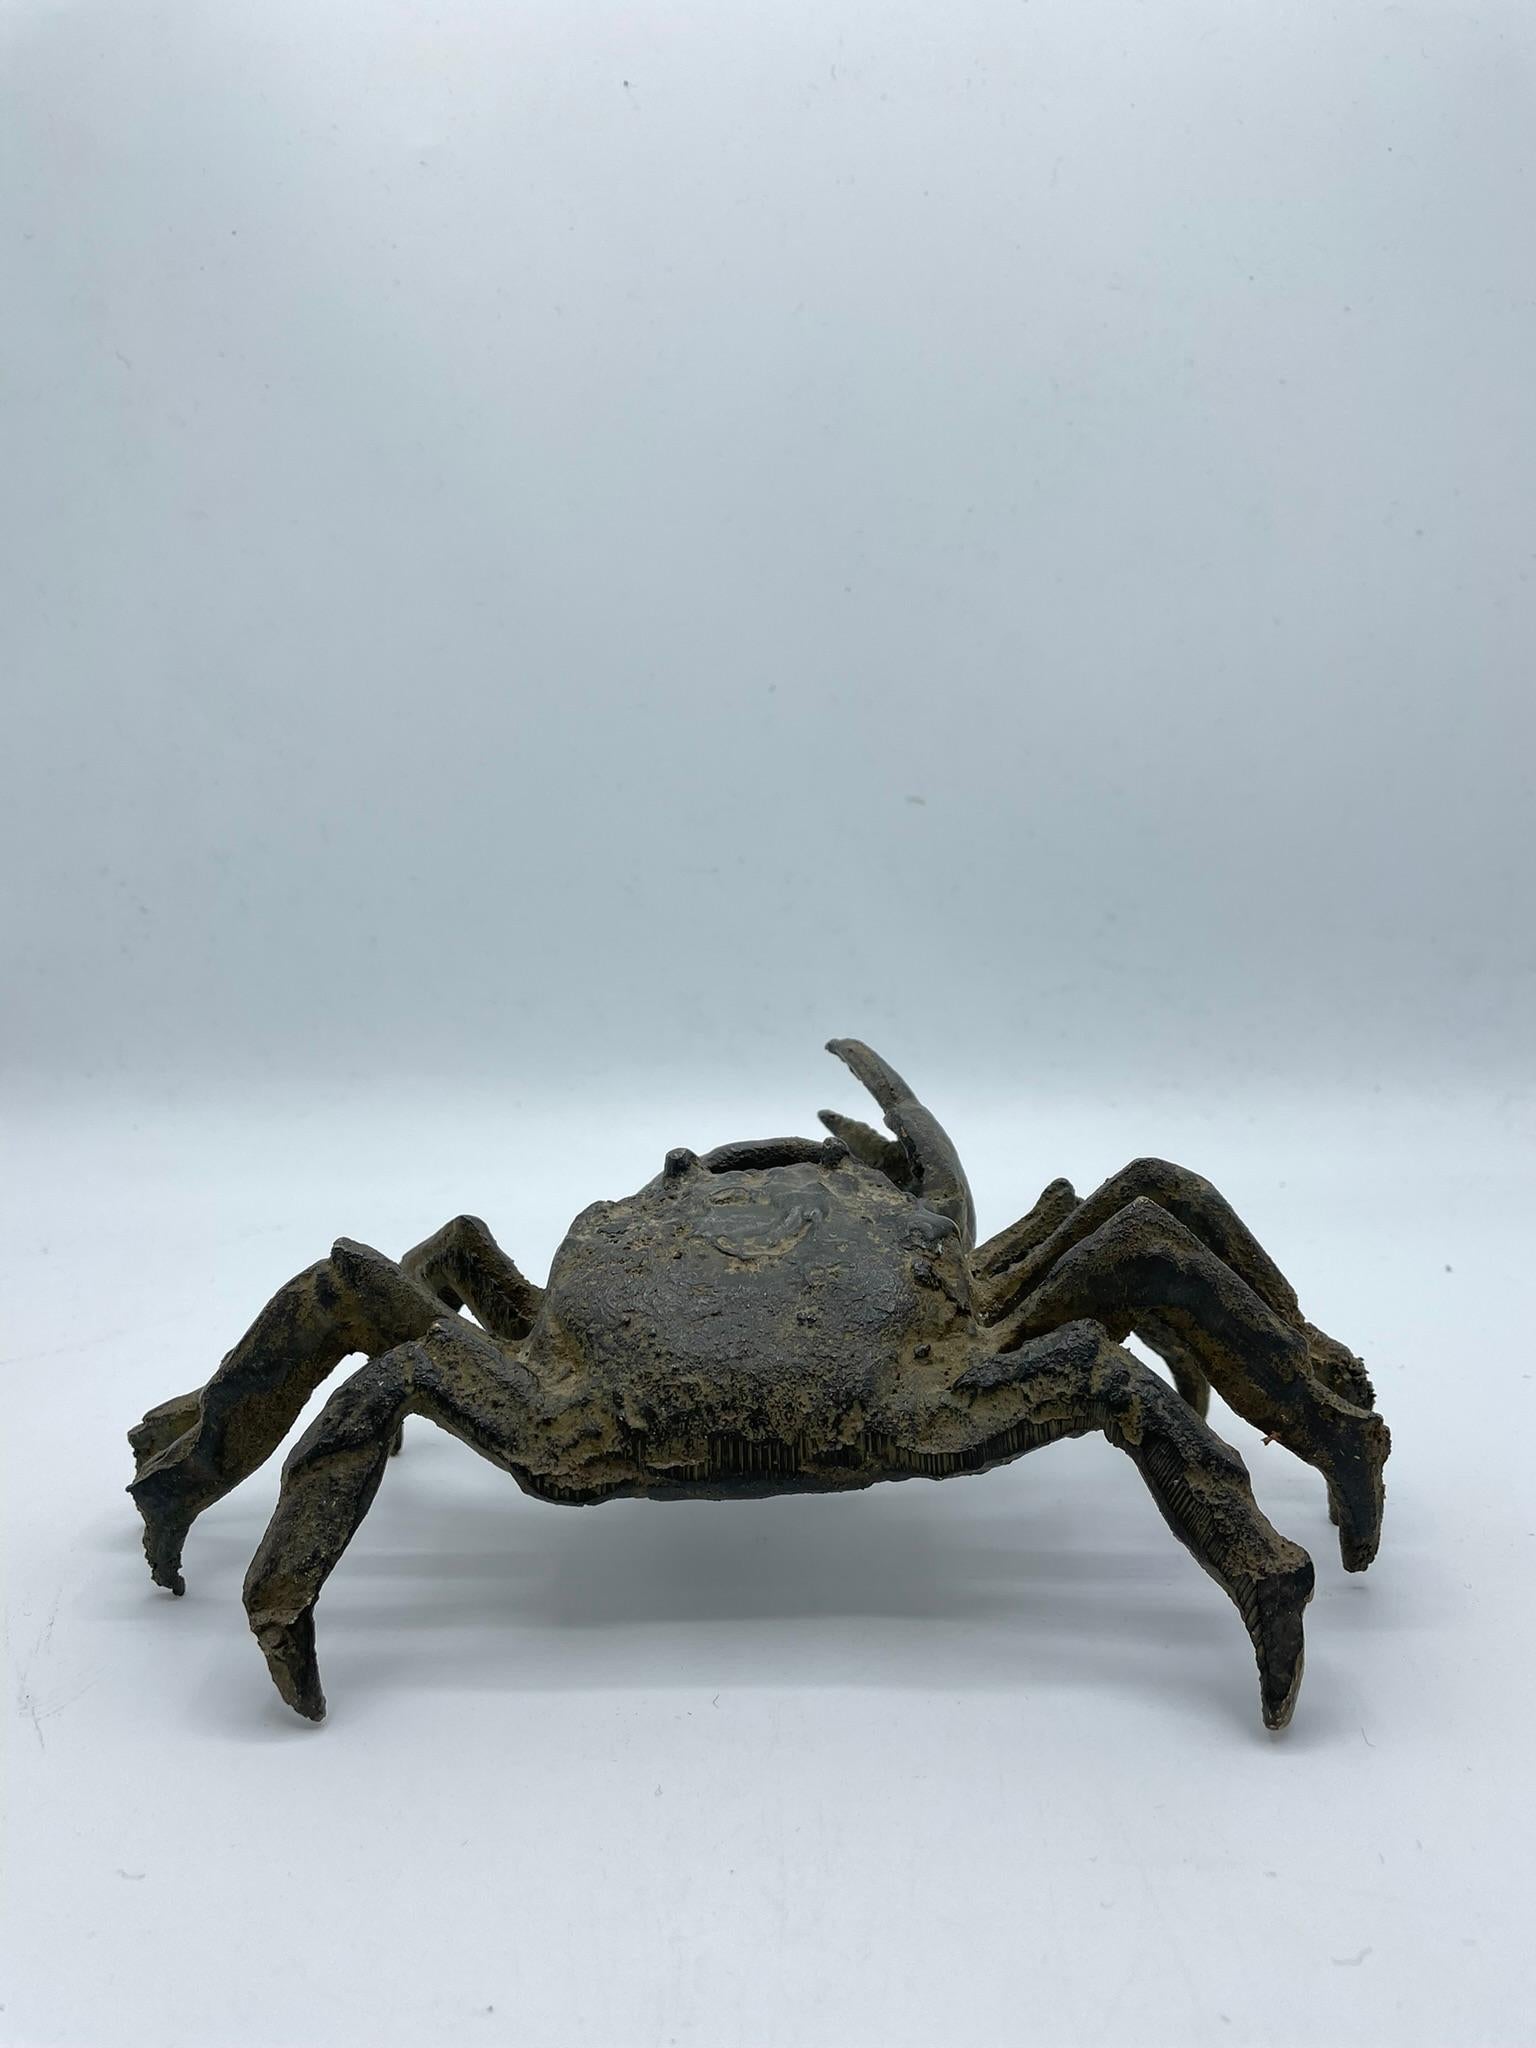 Object of crab with bronze:
A very precious object made before the second world war, when bronze was rare to find.
There are a signature 'N' on the bottom of this crab in red.

-Details-
Era: Showa (around 1930-1939)
Materials: